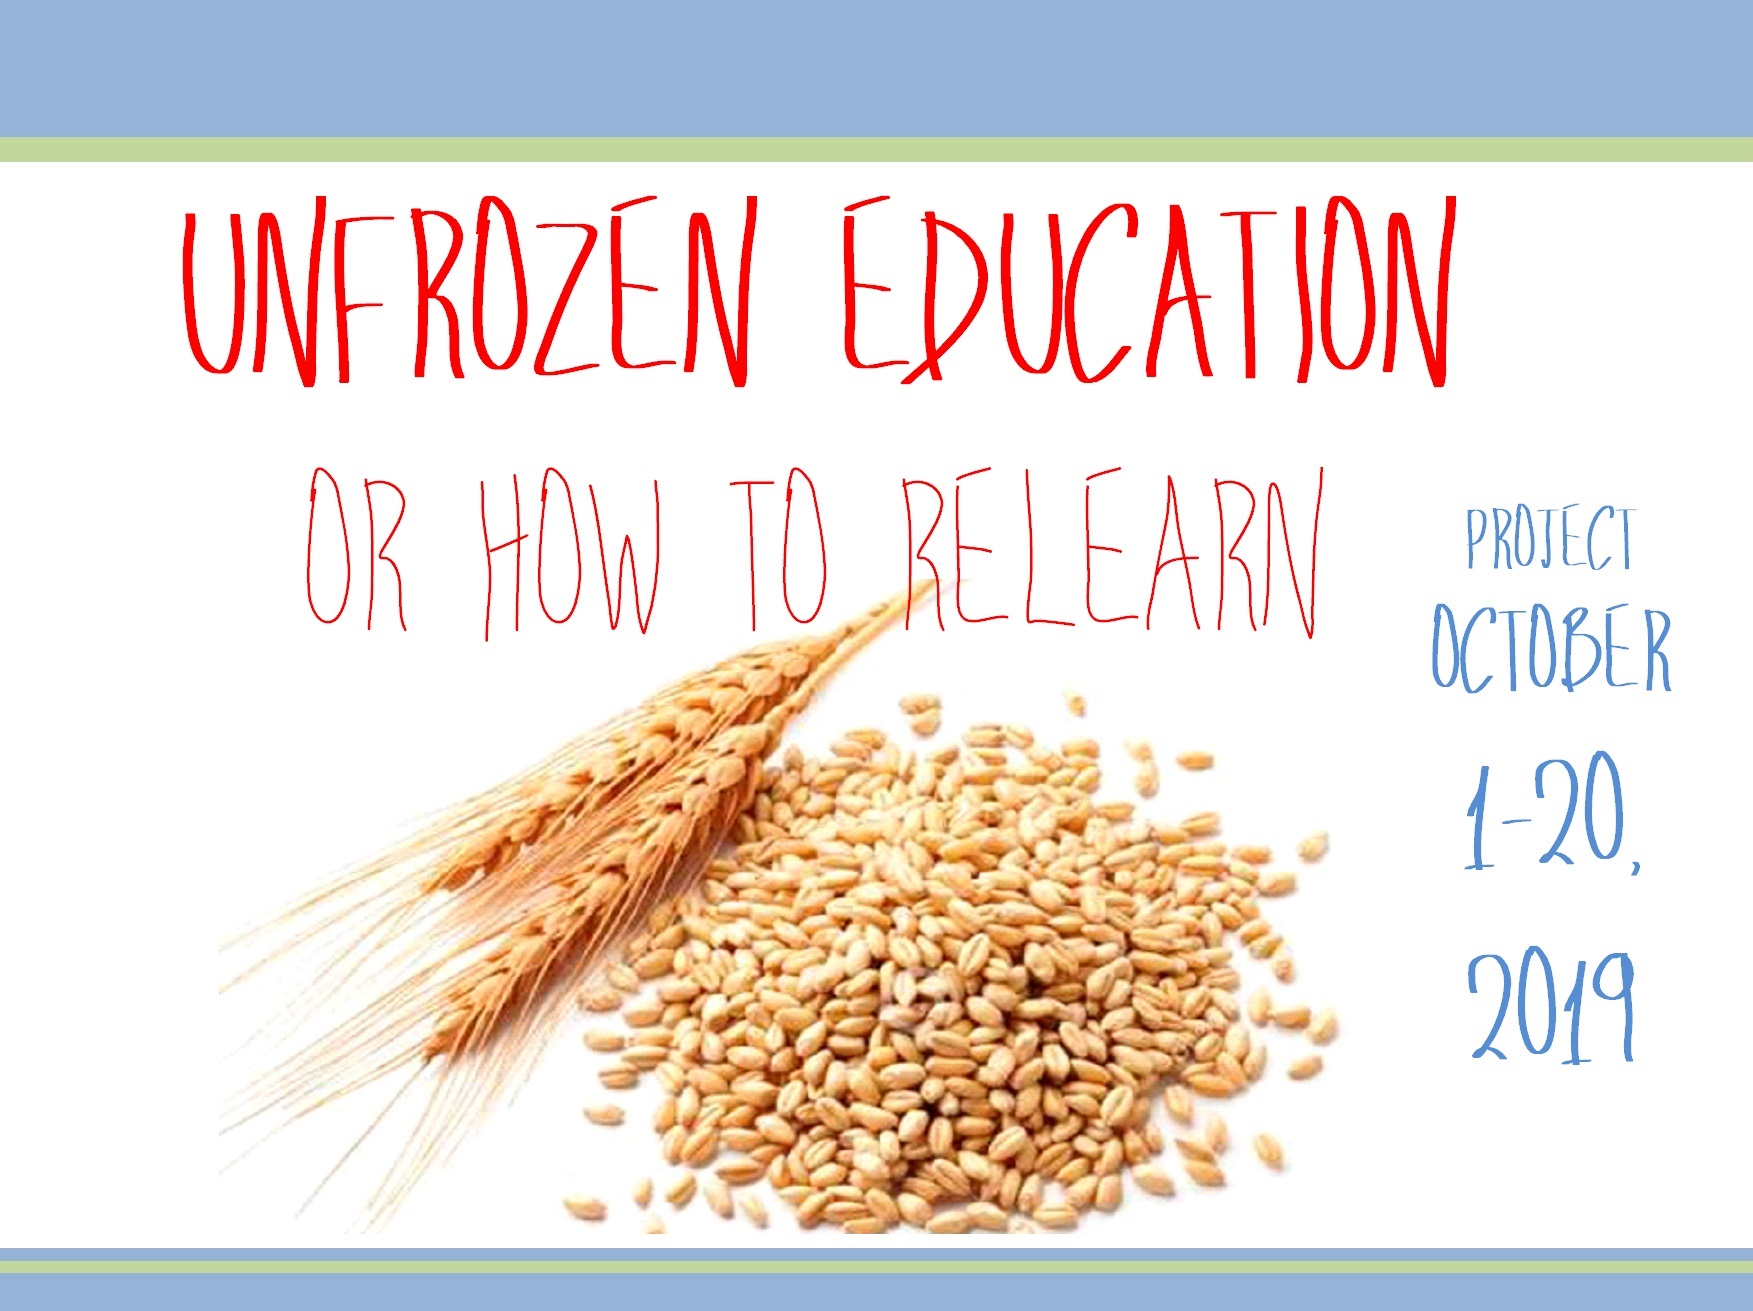 UNFROZEN EDUCATION – OR HOW TO RELEARN PROJECT OCTOBER 1-20, 2019